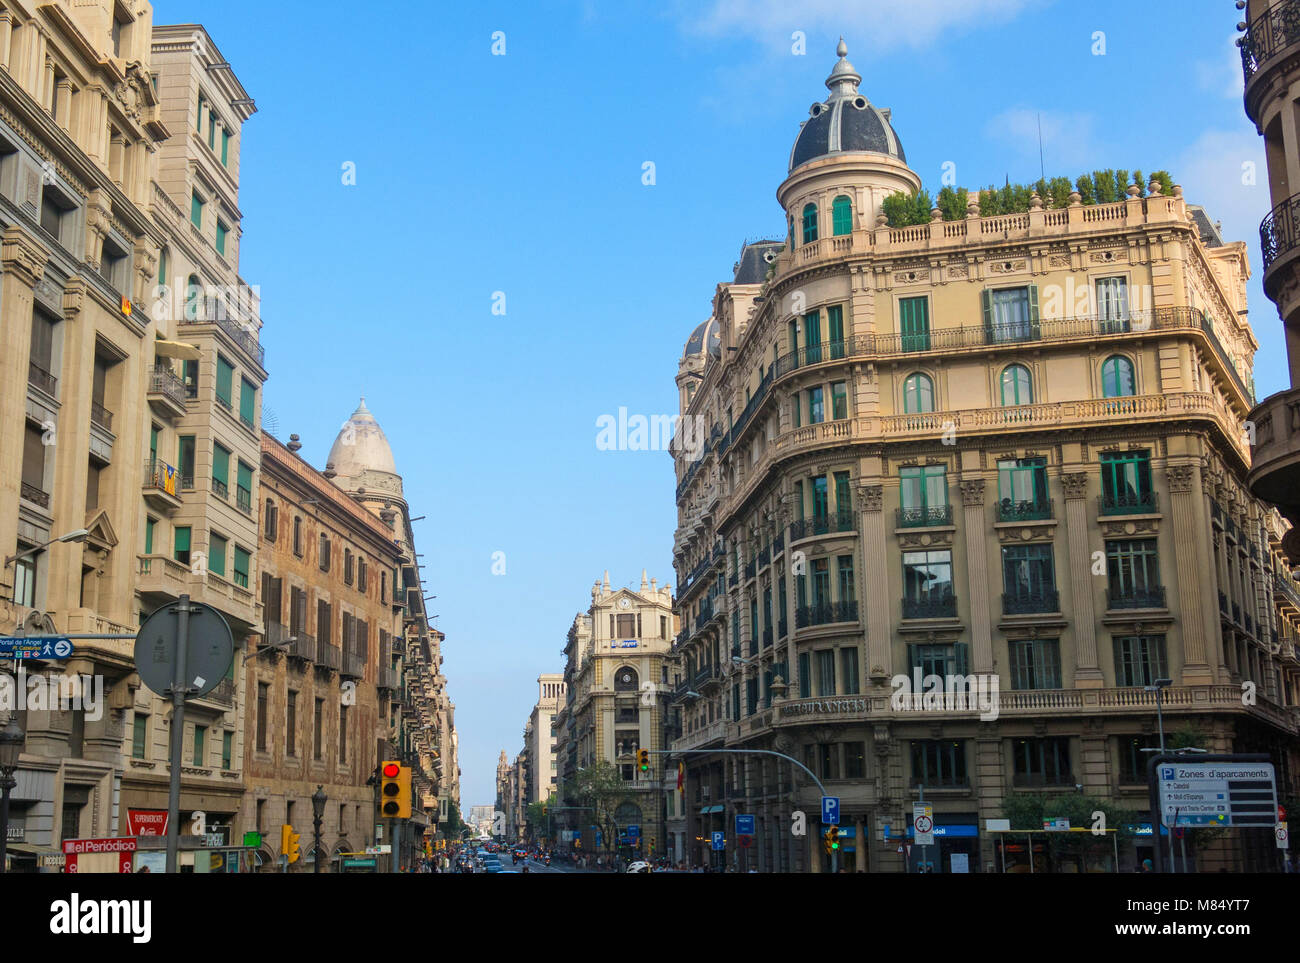 Barcelona, Spain - September 2, 2017: View of Via Laietana, one of the most important streets of the city of Barcelona, which connects the city center Stock Photo